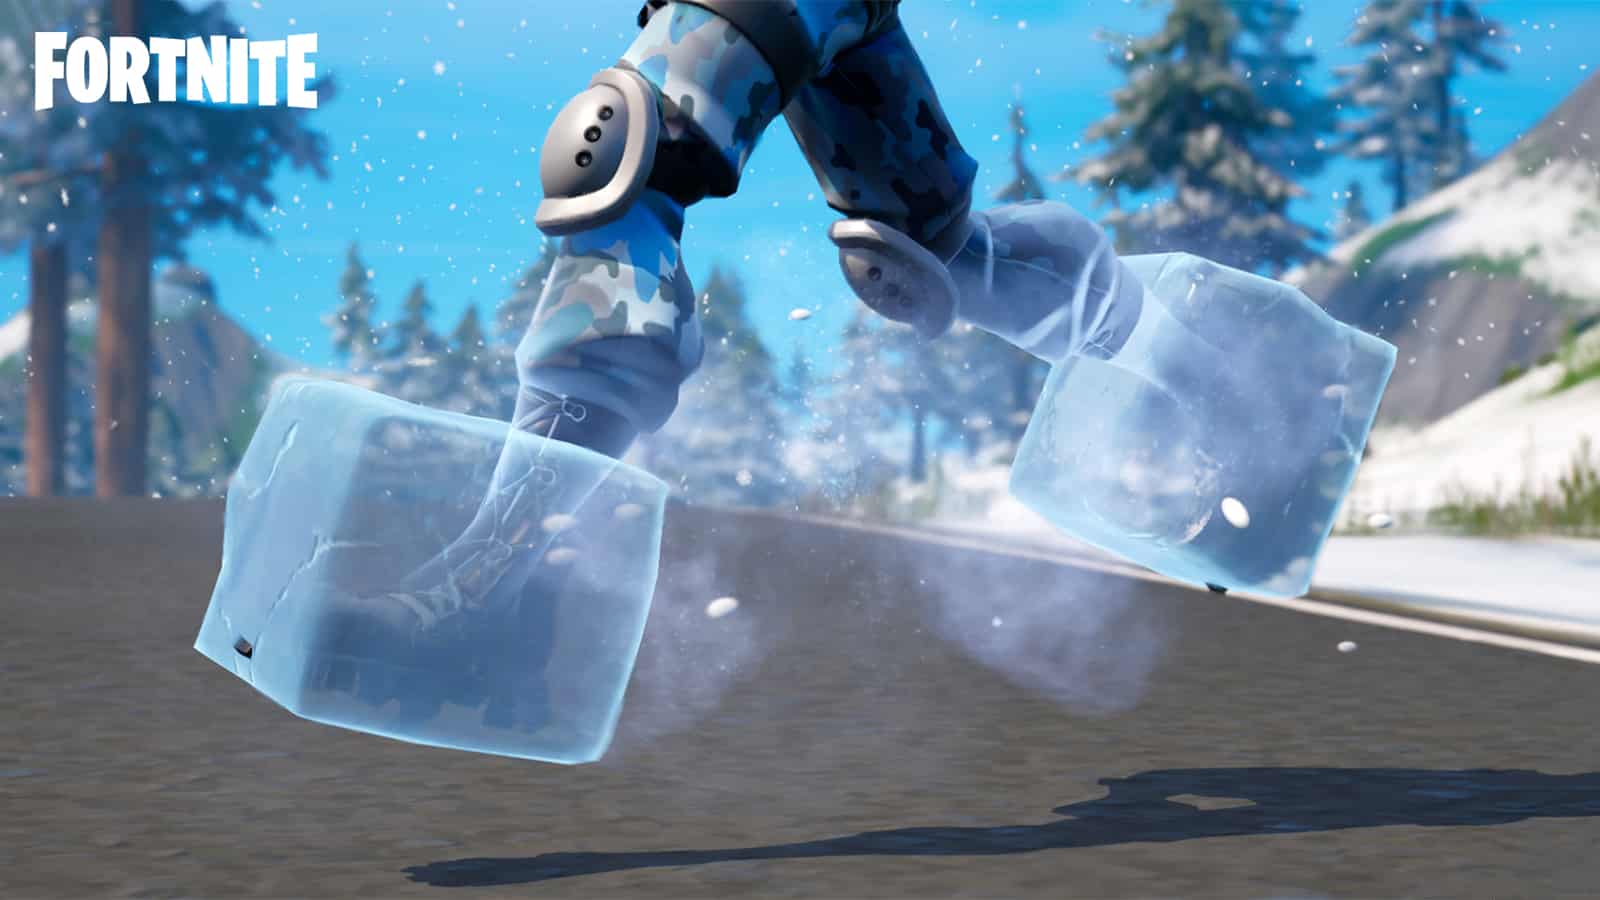 A Fortnite player with Icy Feet